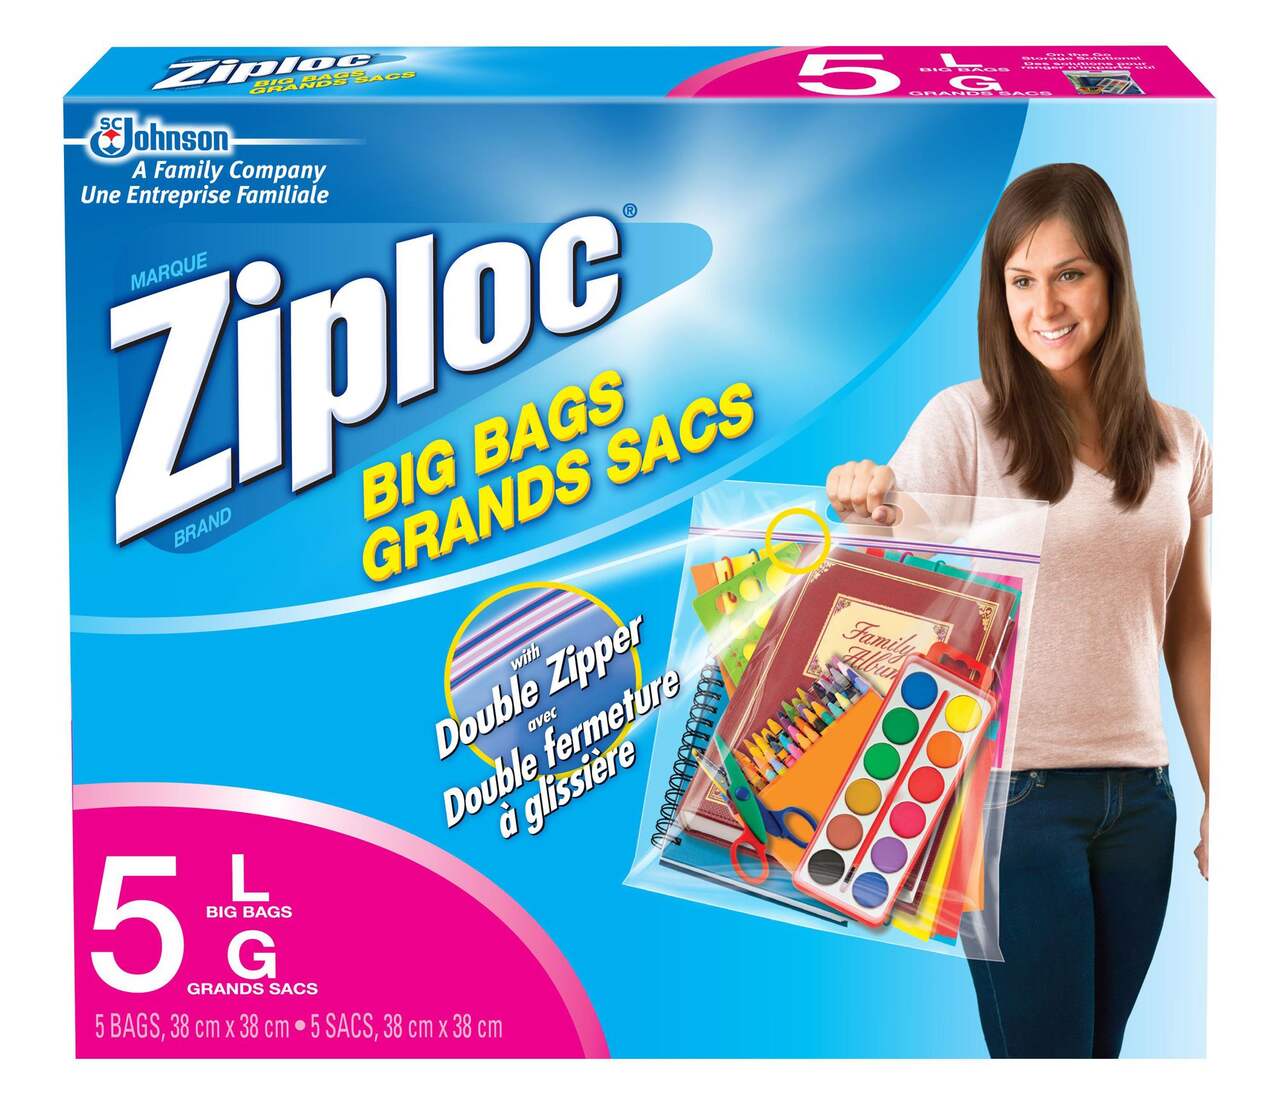 https://media-www.canadiantire.ca/product/living/home-essentials/household-consumables/0530276/ziplock-big-bags-large-5-pack-55f4b1e6-2107-4041-8733-b85a0053dd8e-jpgrendition.jpg?imdensity=1&imwidth=640&impolicy=mZoom